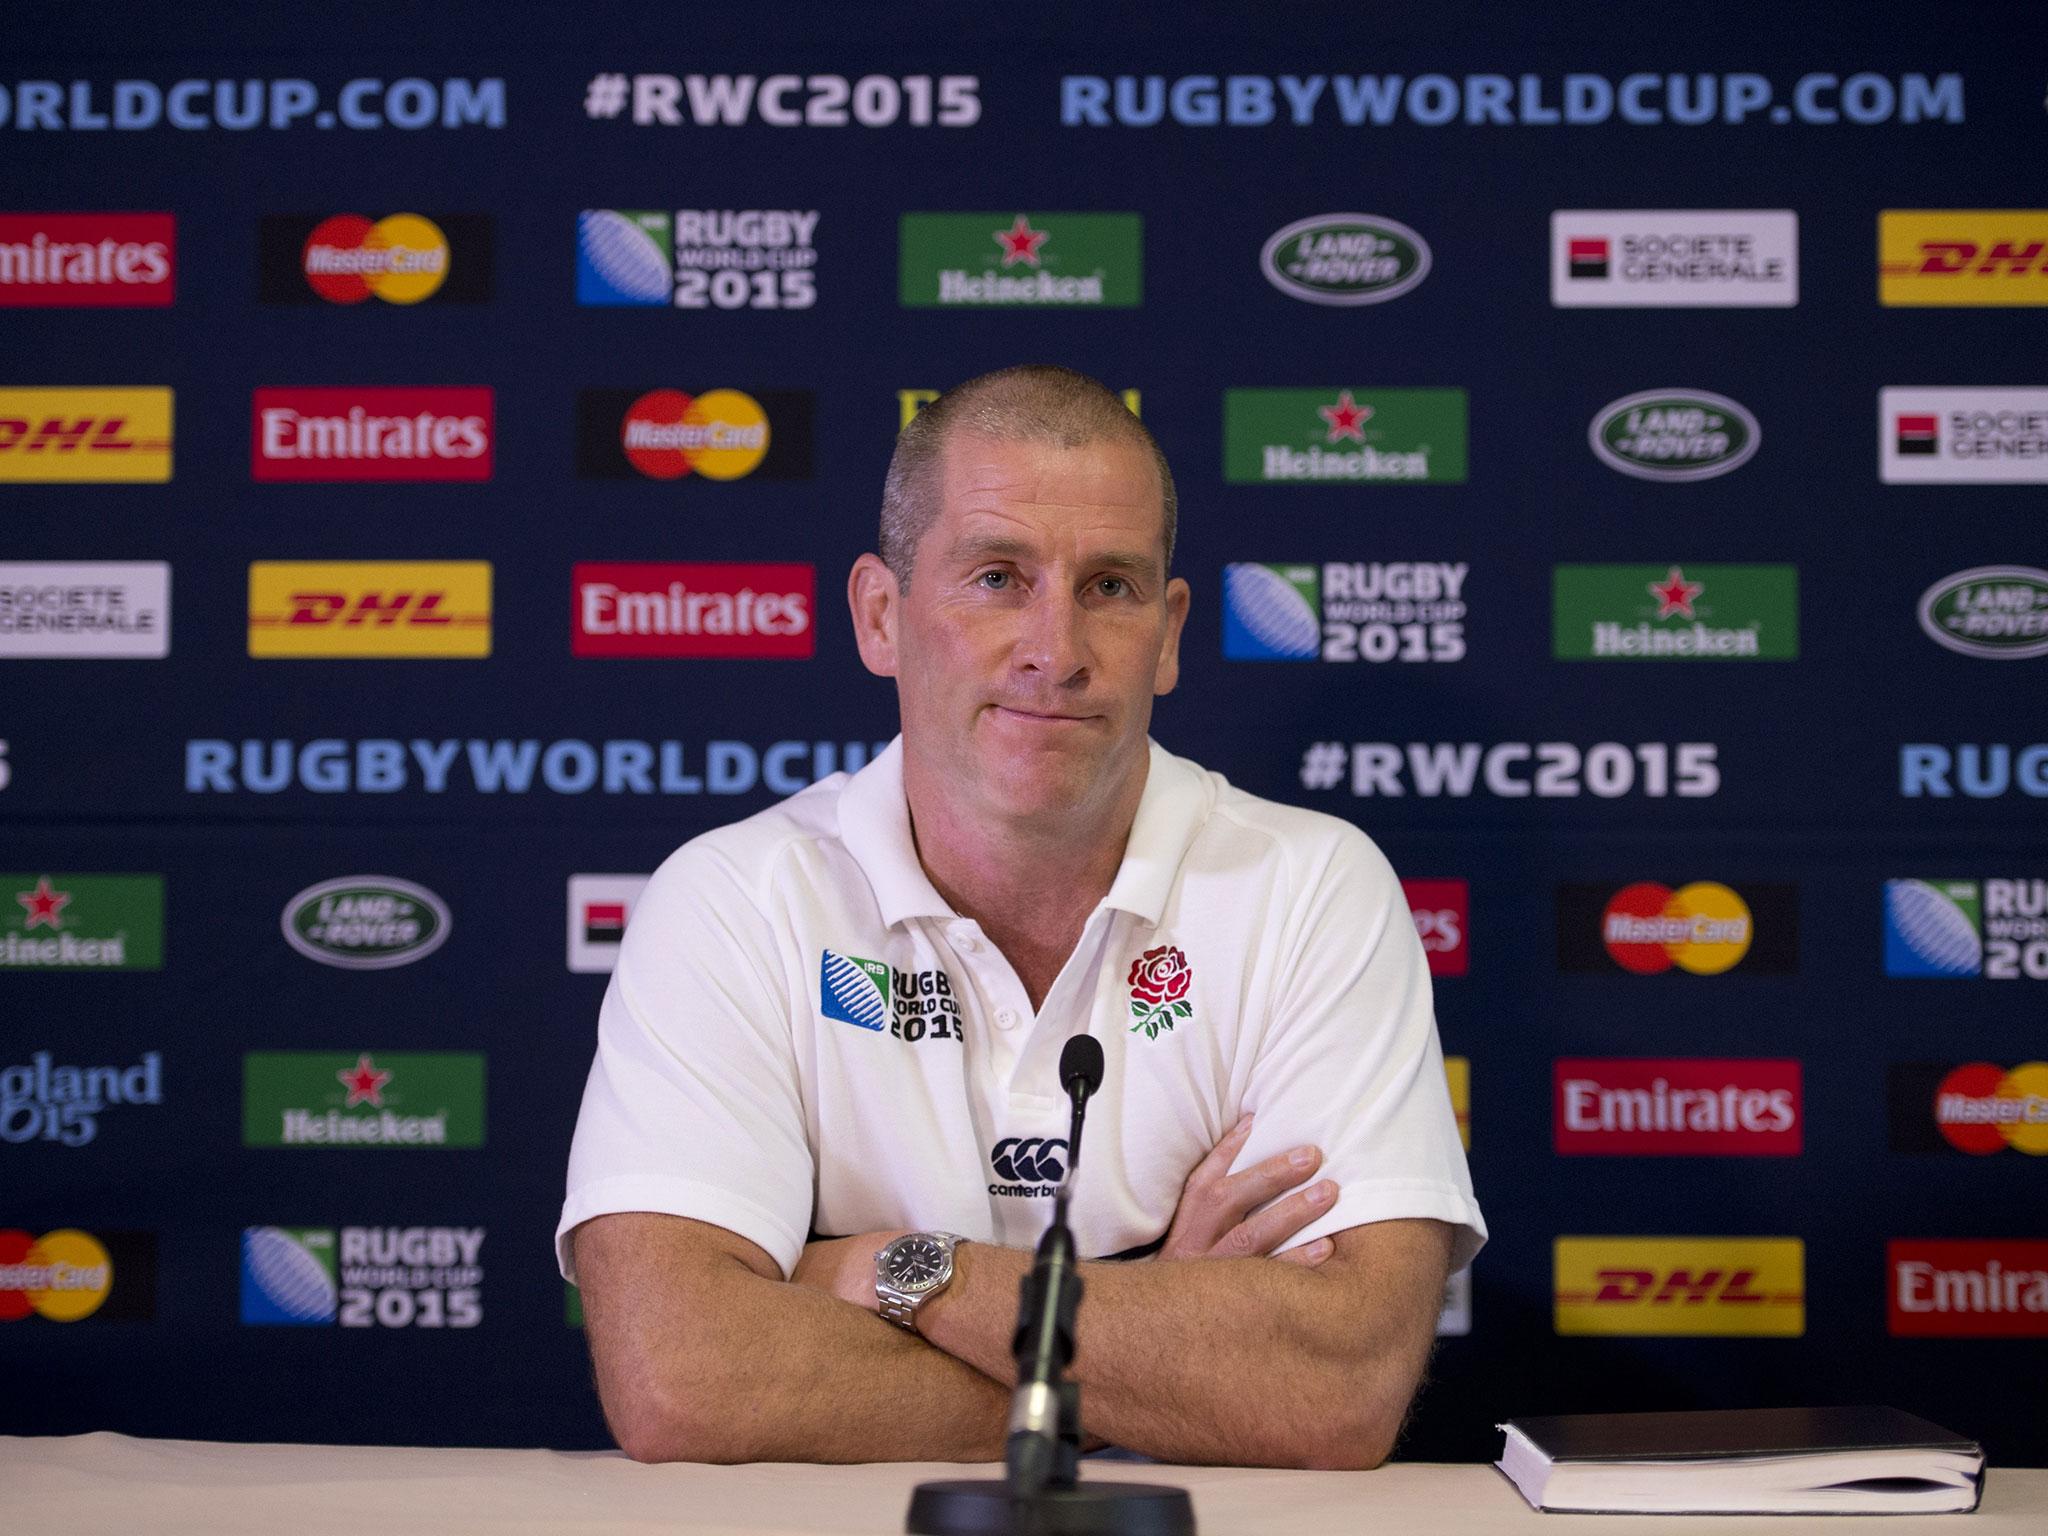 Stuart Lancaster was dismissed as England head coach after the 2015 Rugby World Cup